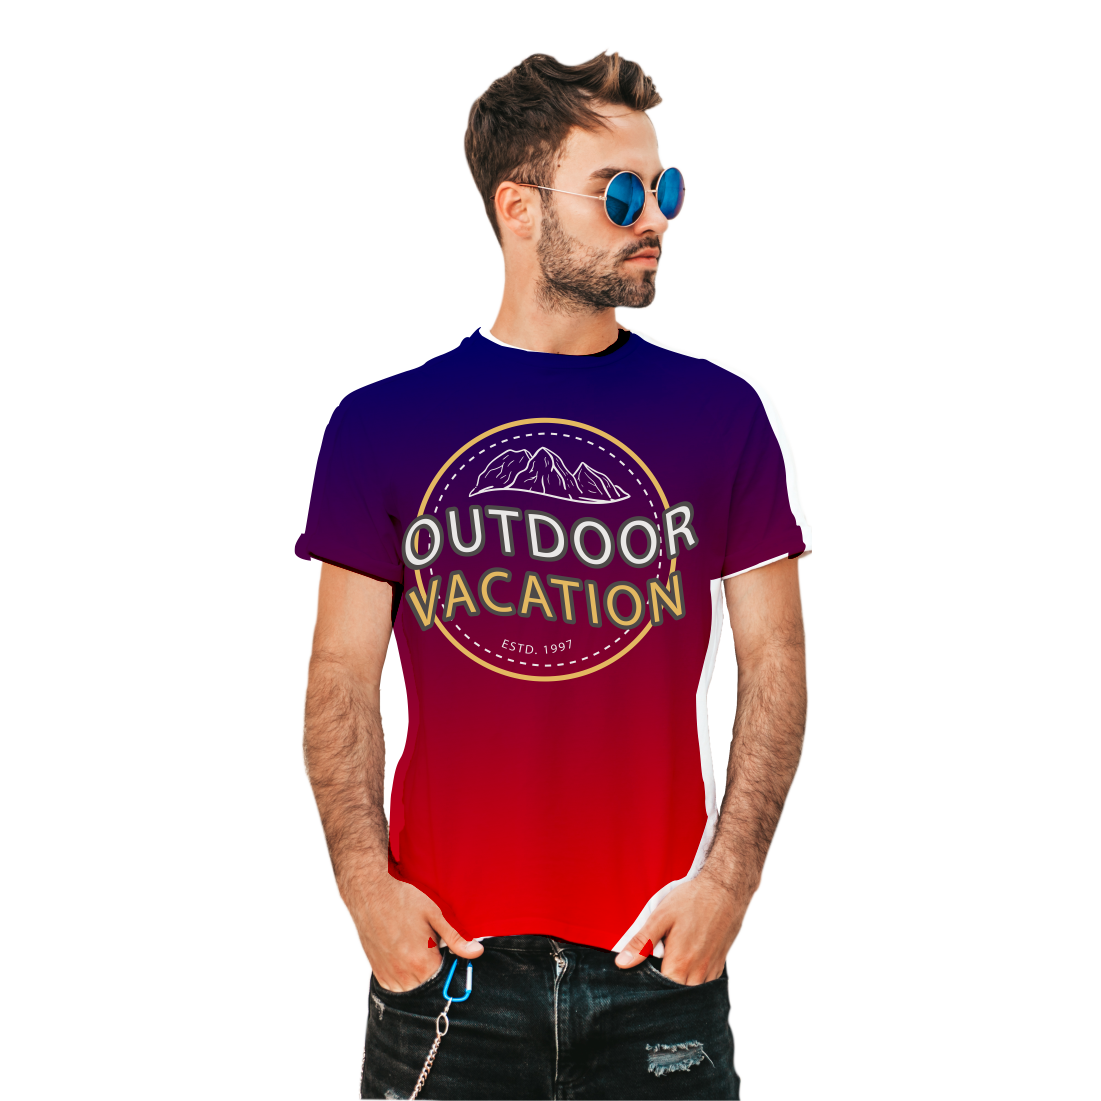 OUT DOOR VACATION NATURE PRINTED T-SHIRTS